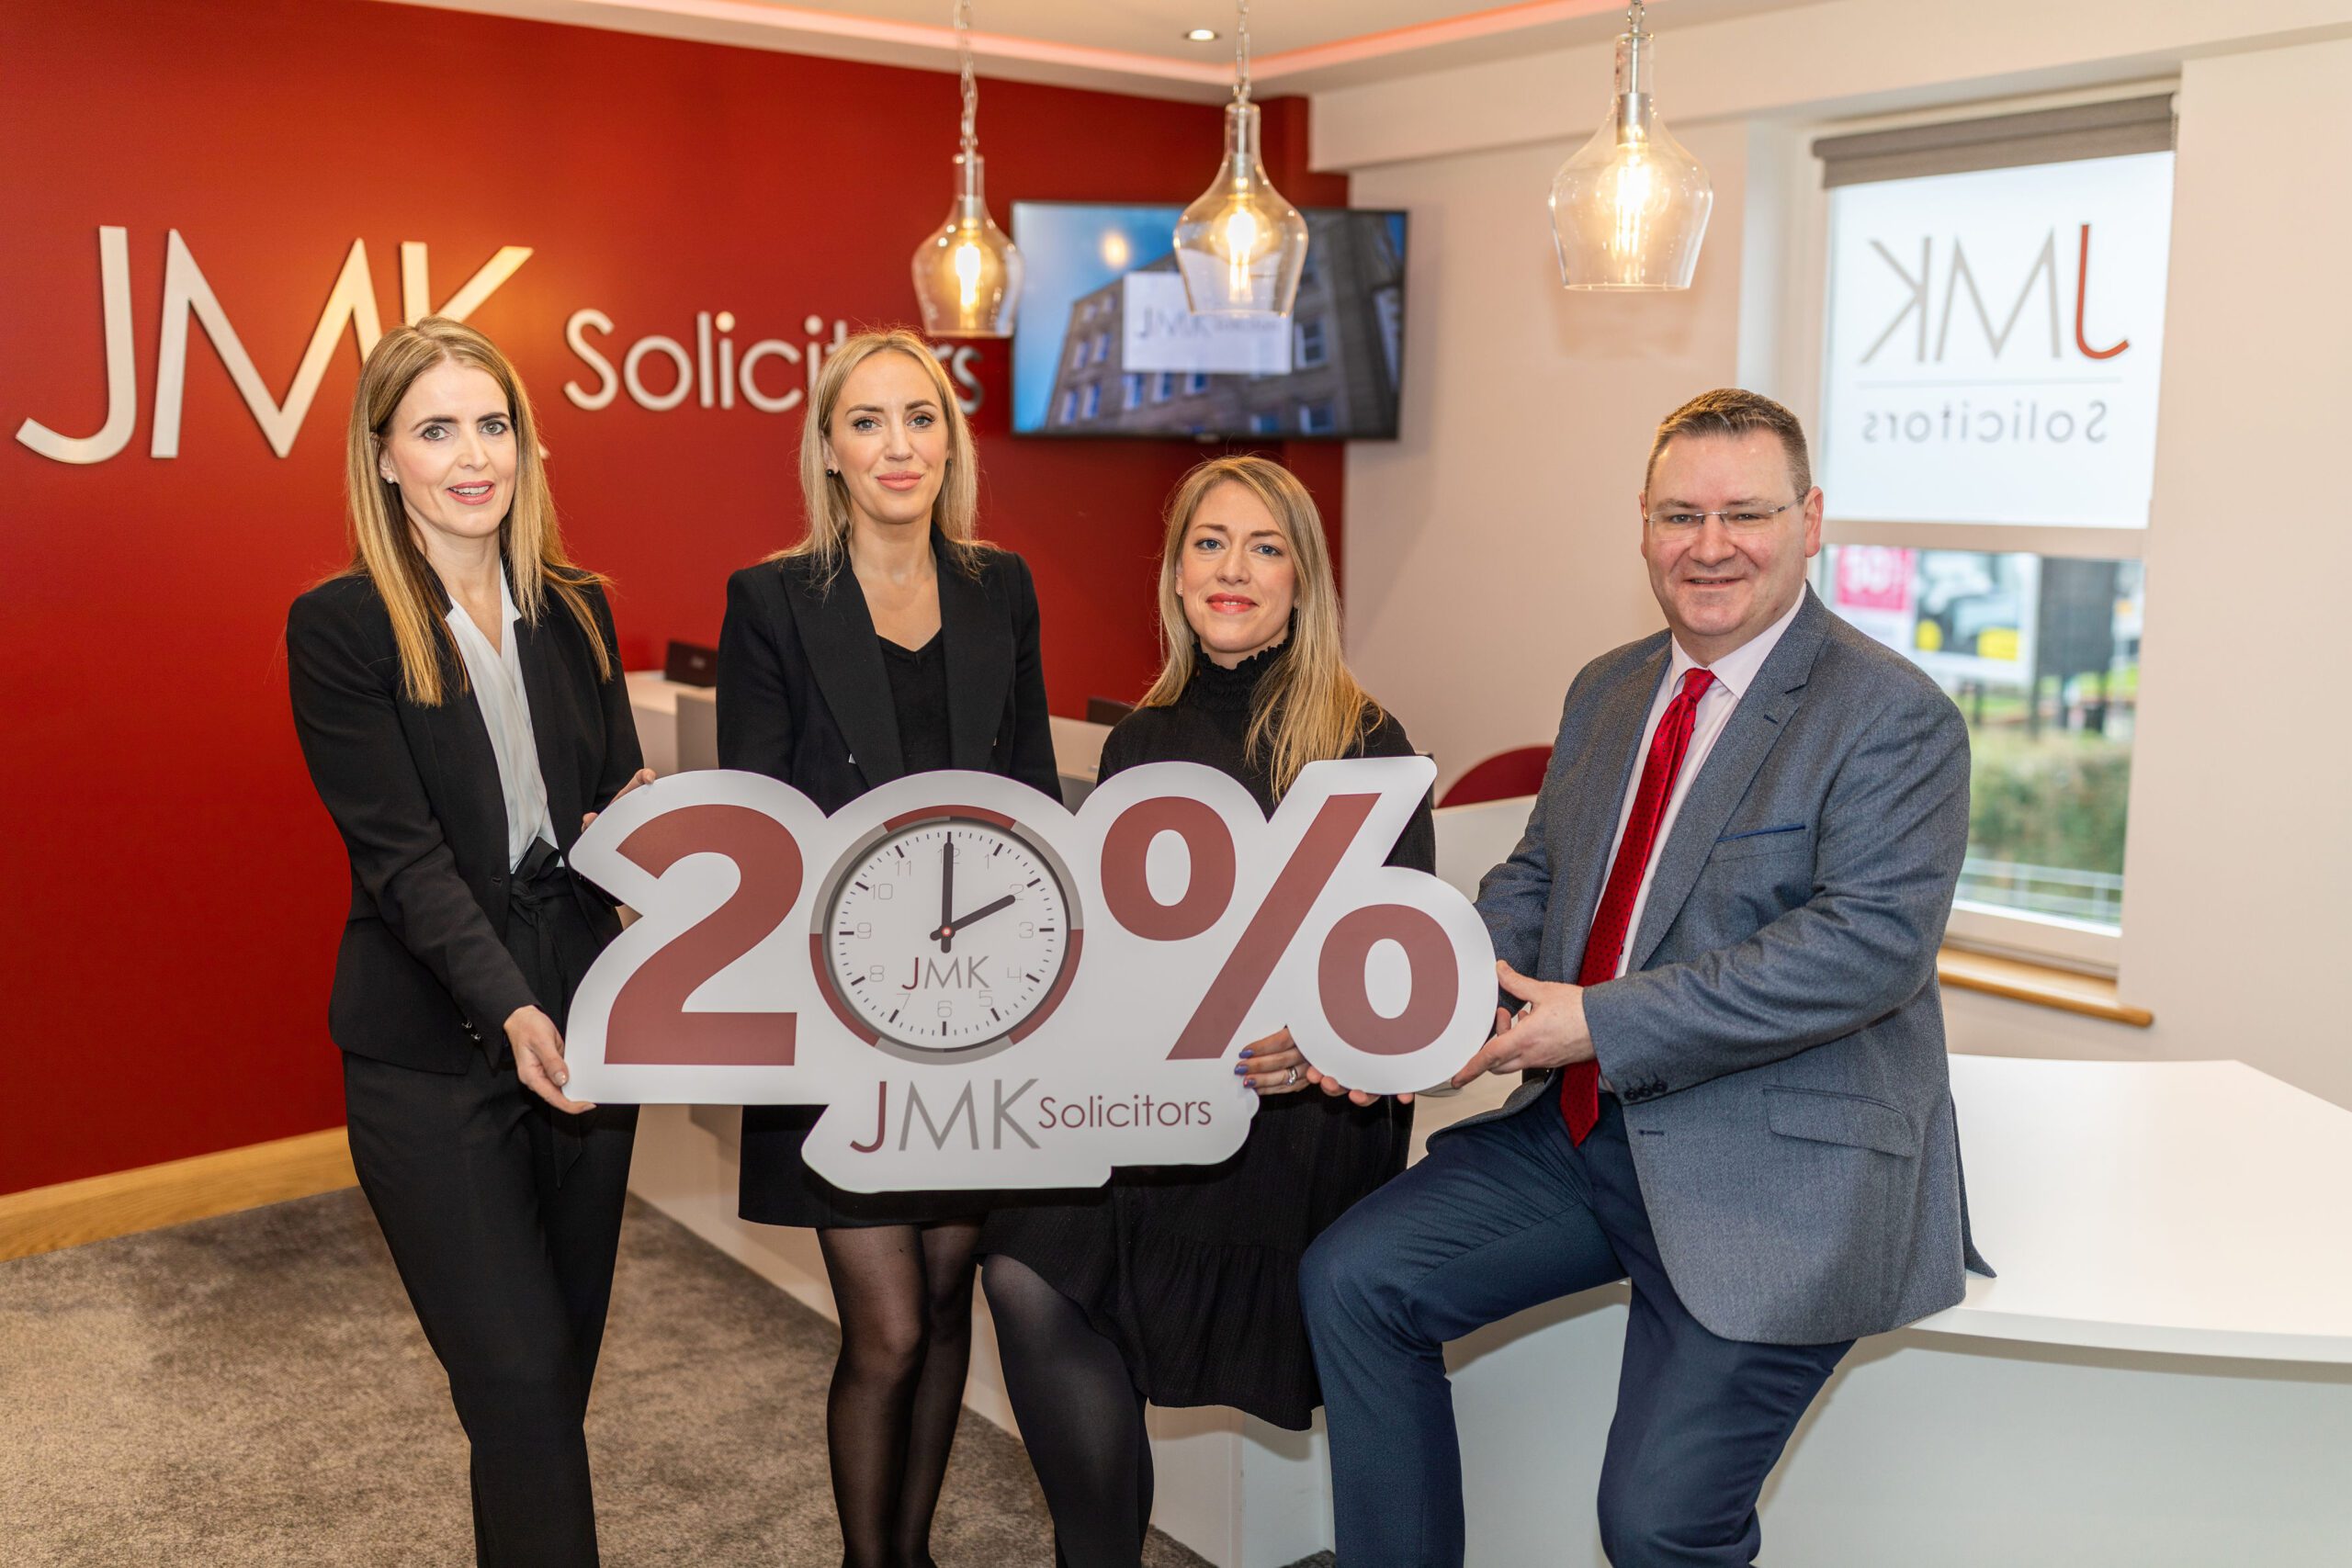 JMK Solicitors were one of the first employers in Northern Ireland to commit to and implement a four-day week for all employees, with no reduction in pay.